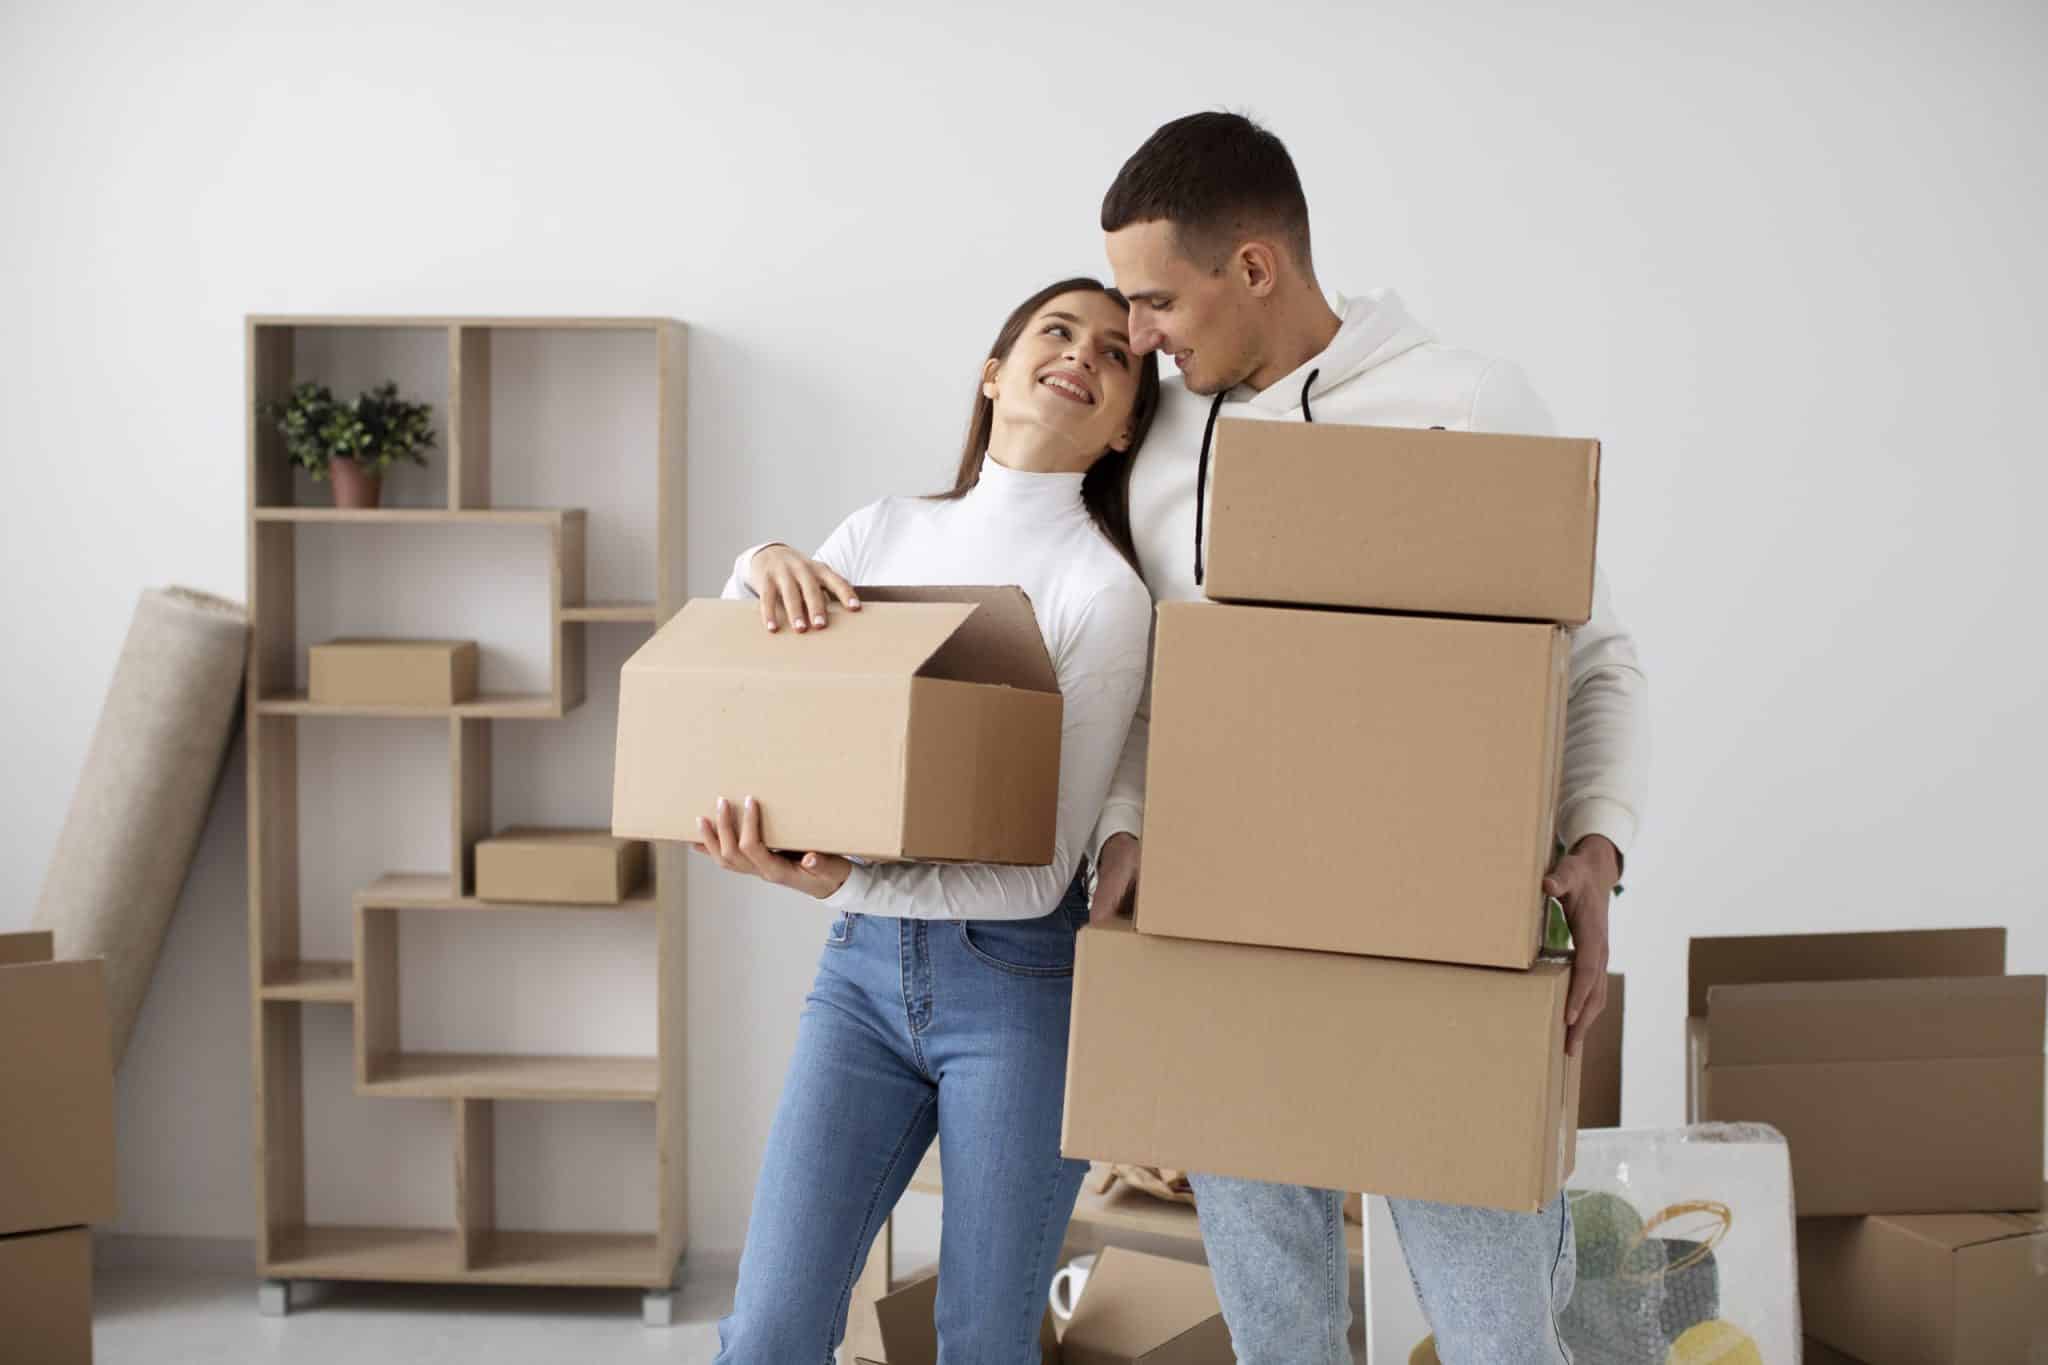 red flags before moving in together